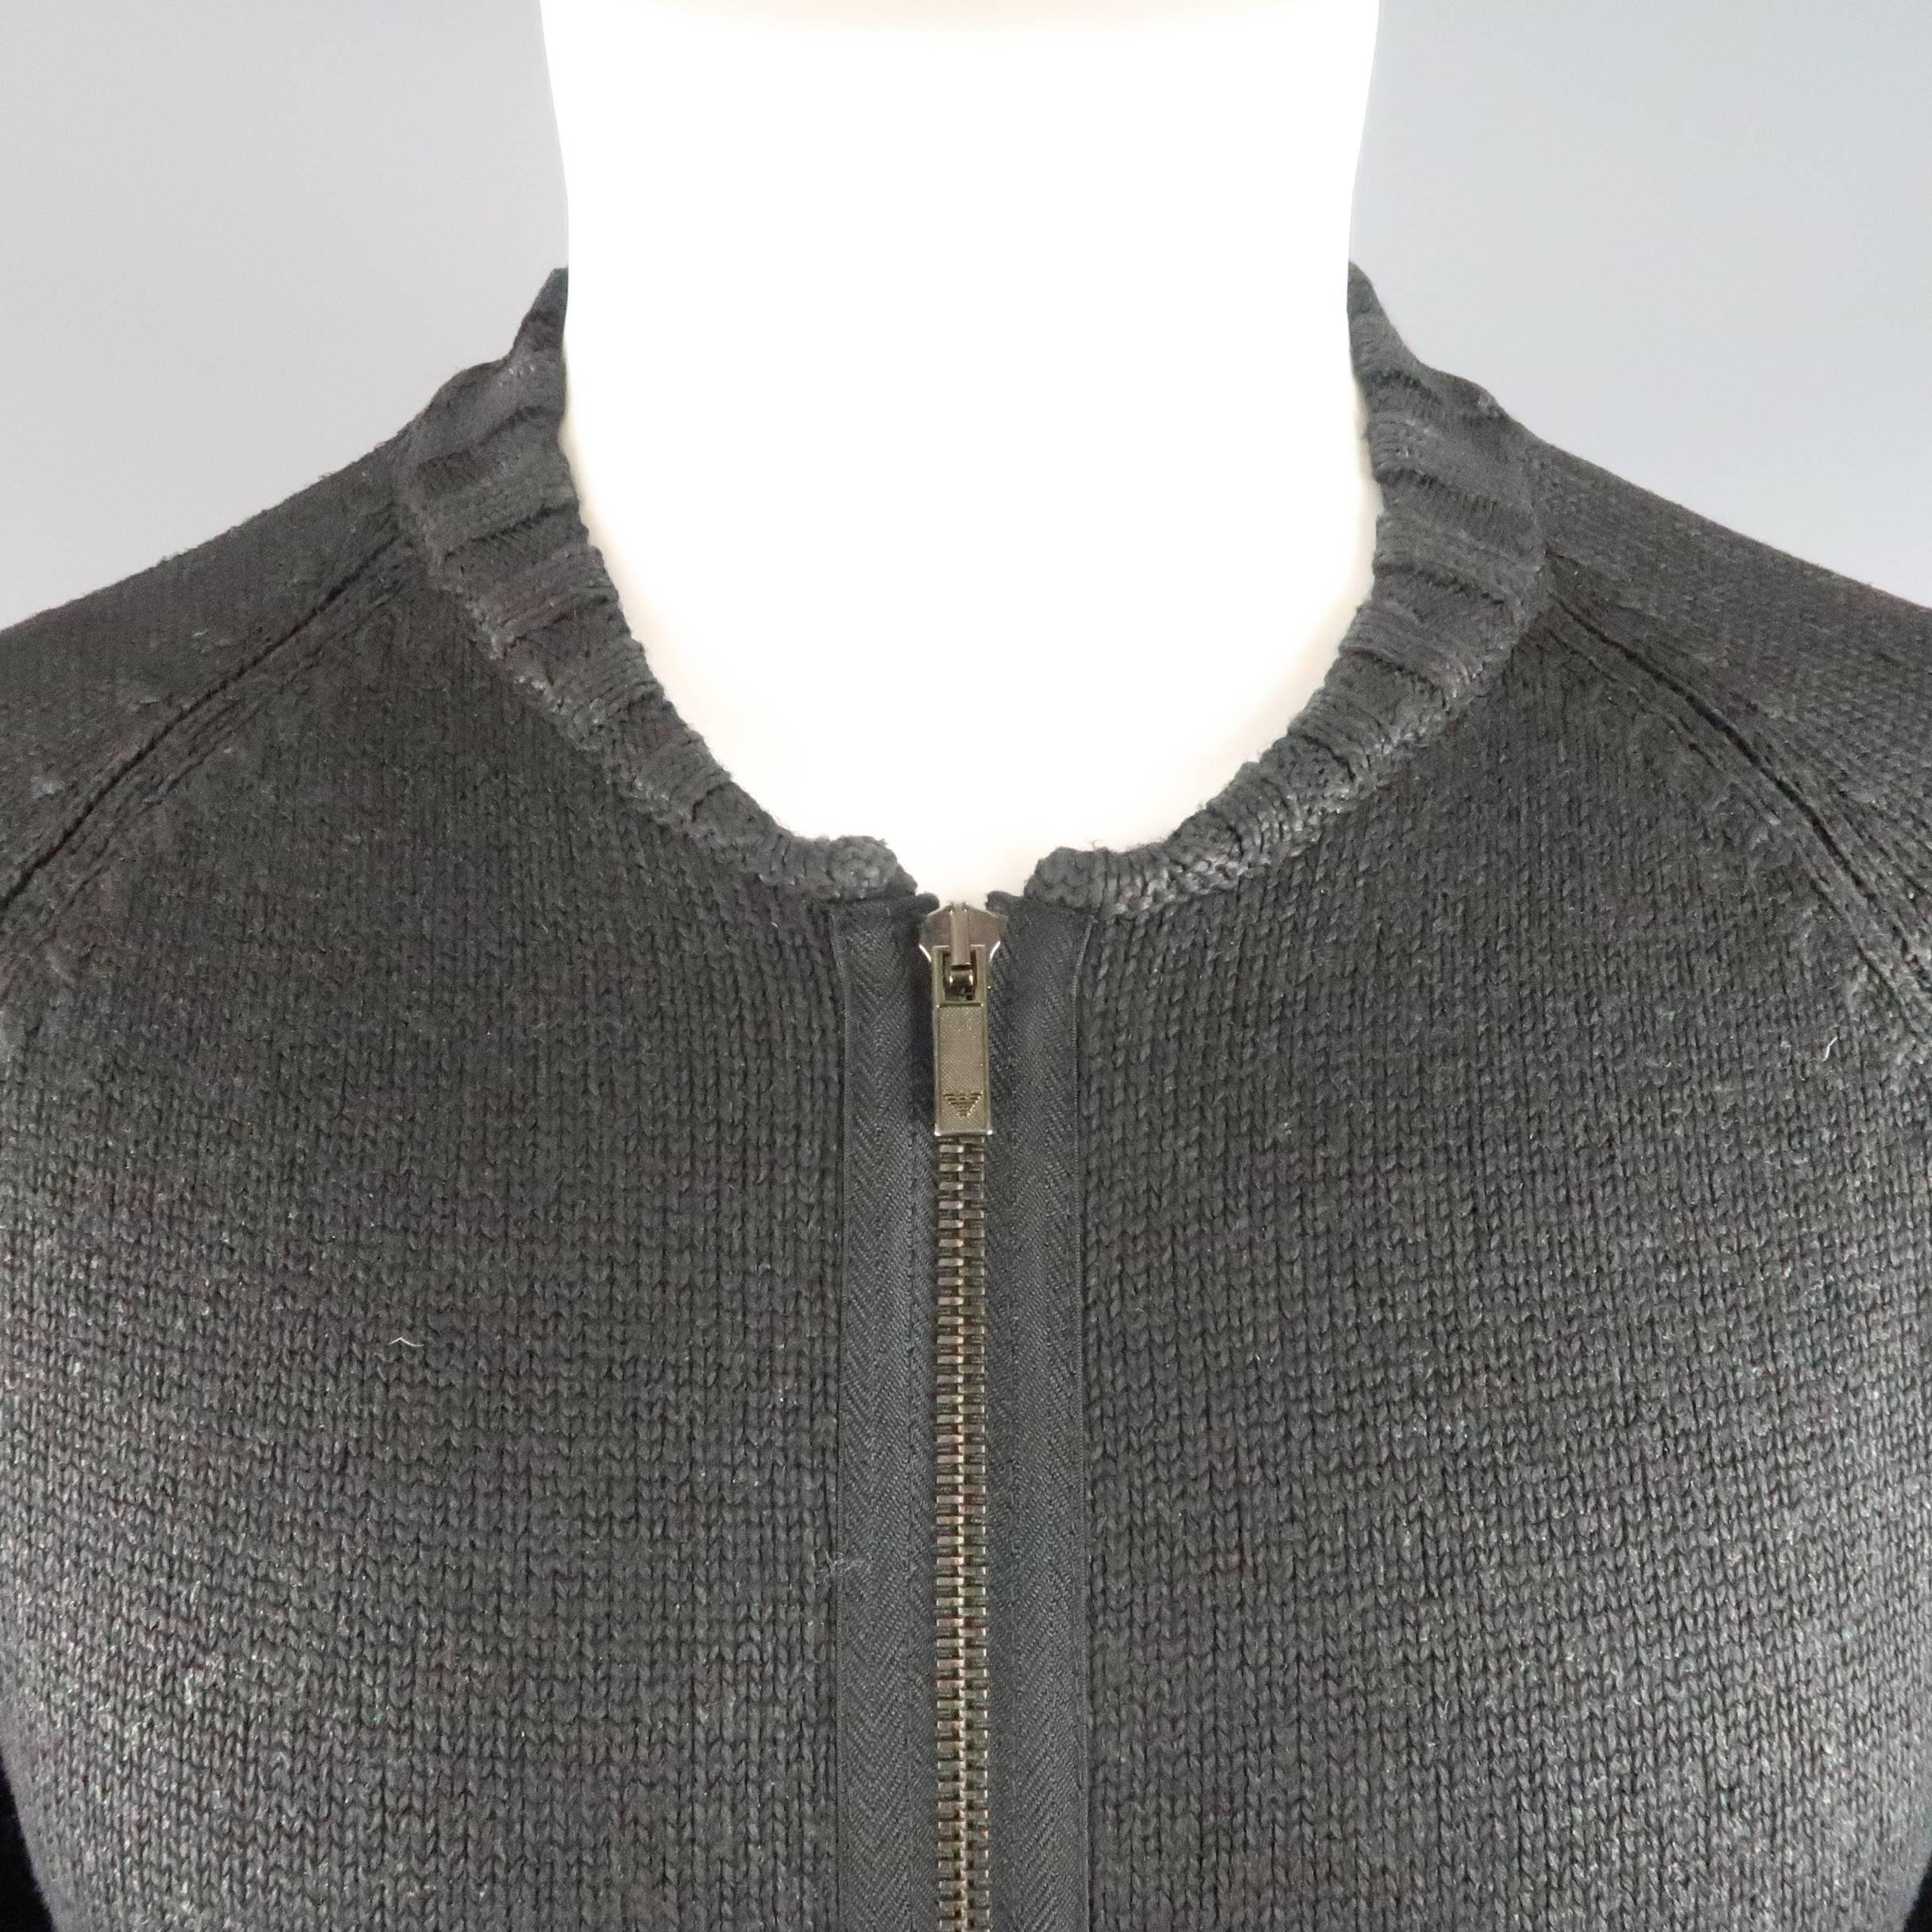 EMPORIO ARMANI zip cardigan sweater comes in a matte shine waxed wool knit and features a baseball collar and ribbed cuffs. Made in Italy.
 
Excellent Pre-Owned Condition.
Marked: IT 46
 
Measurements:
 
Shoulder: 16 in.
Chest: 42 in.
Sleeve: 27